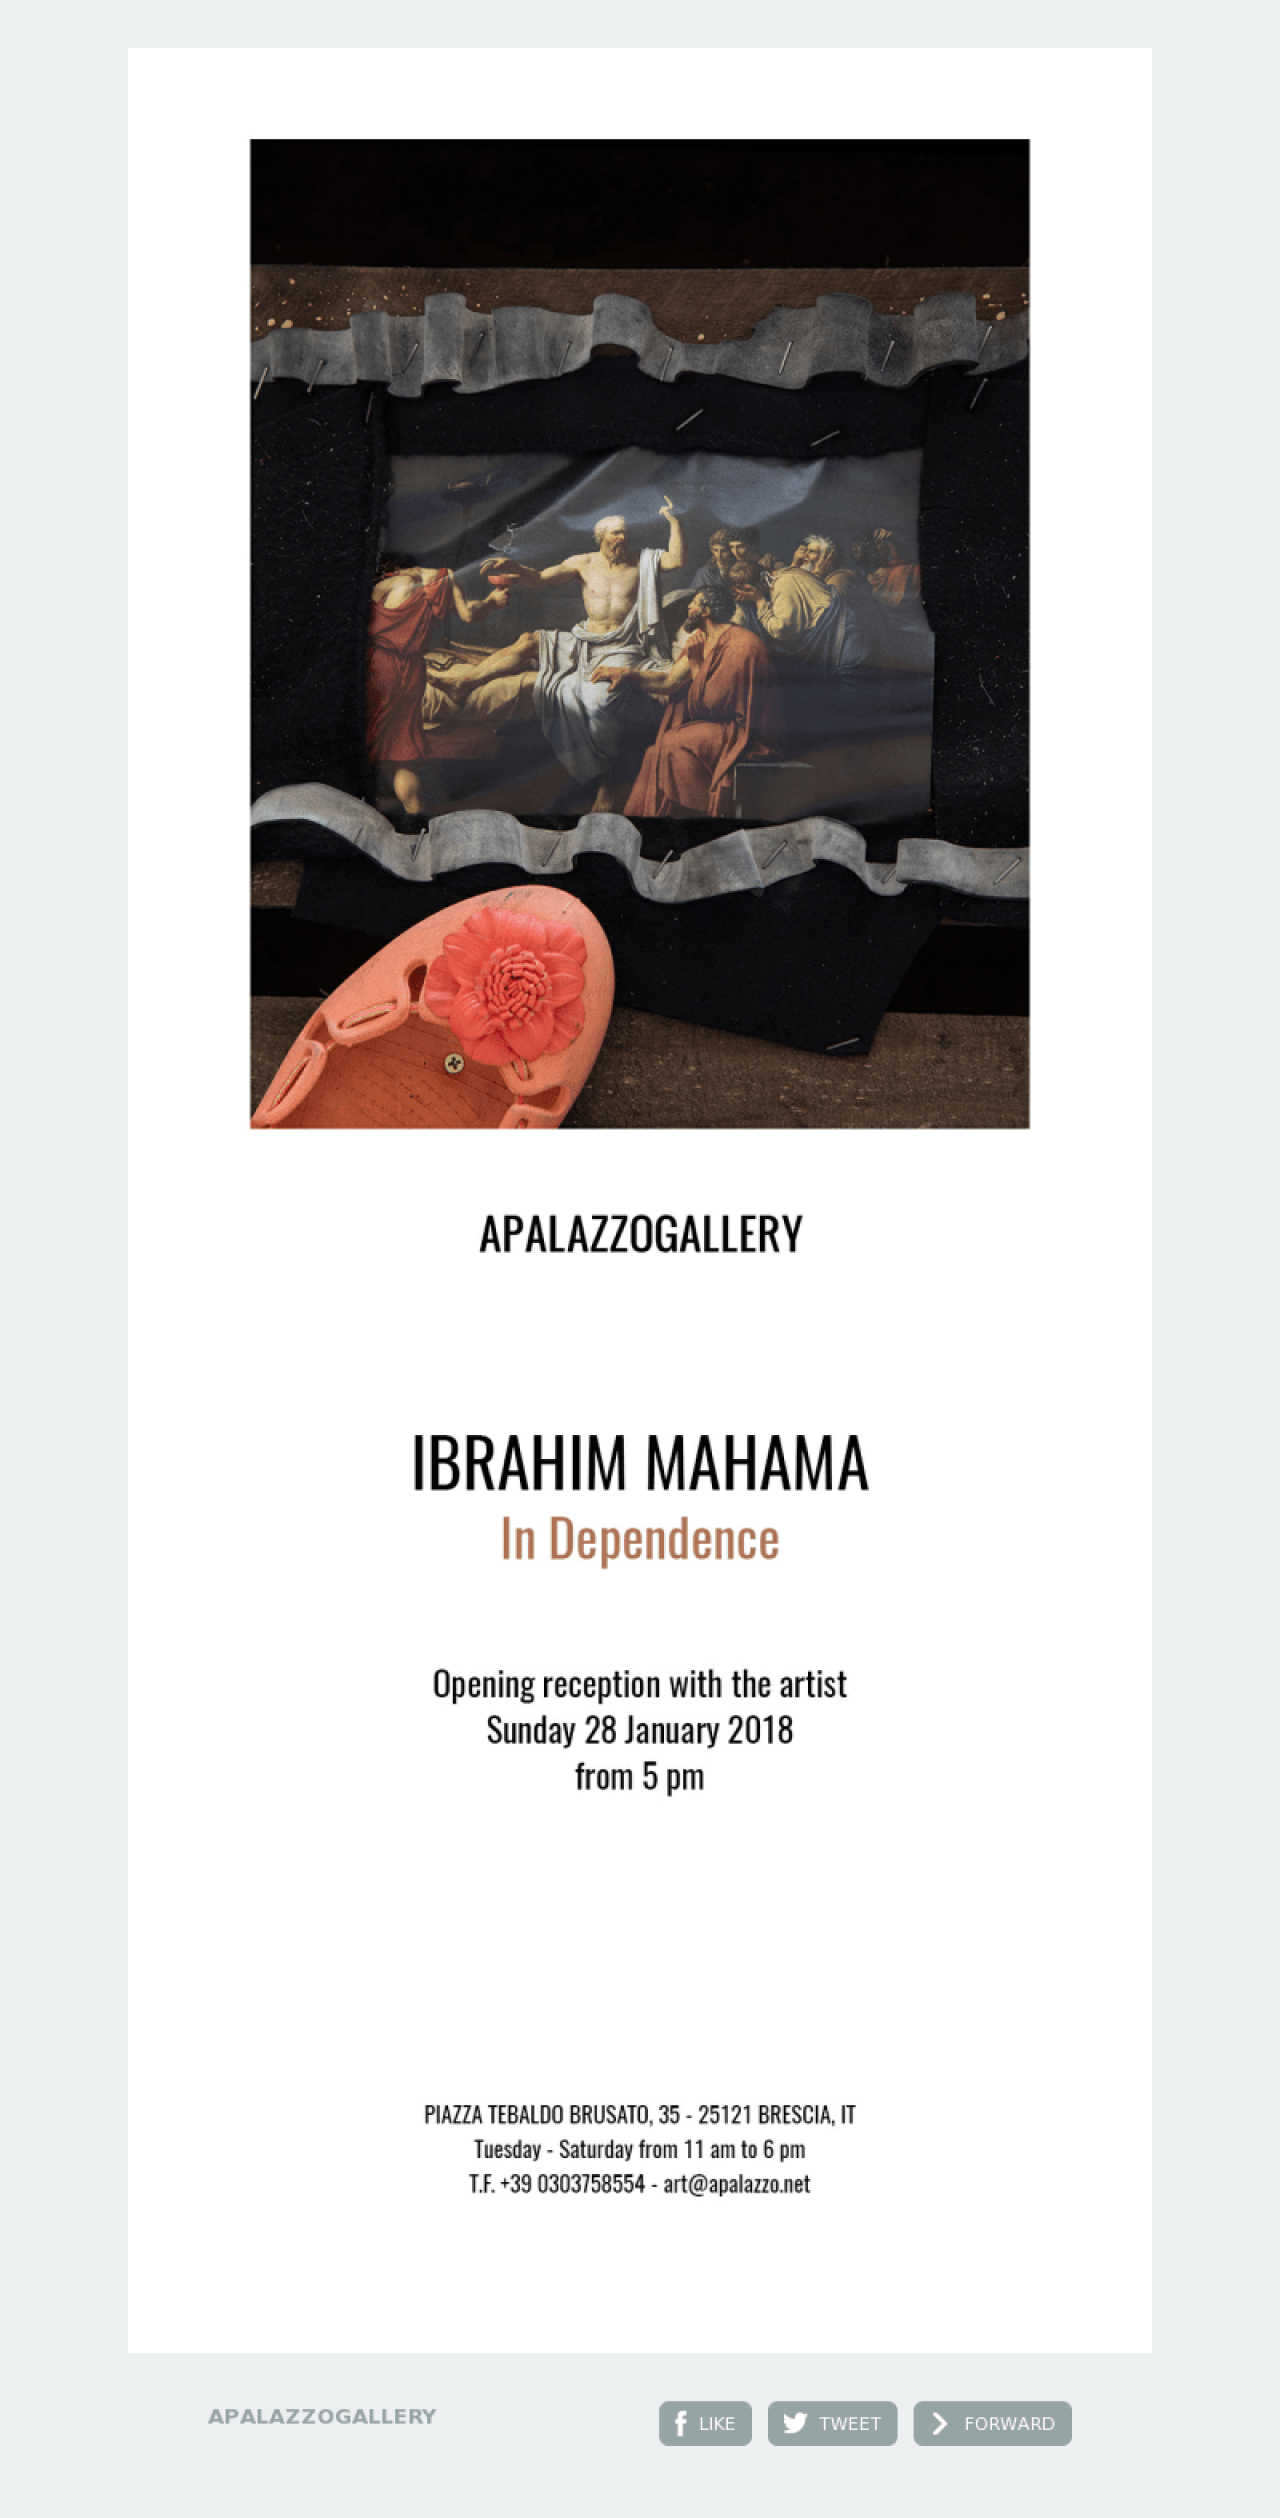 APALAZZOGALLERY example - Made with MailerLite